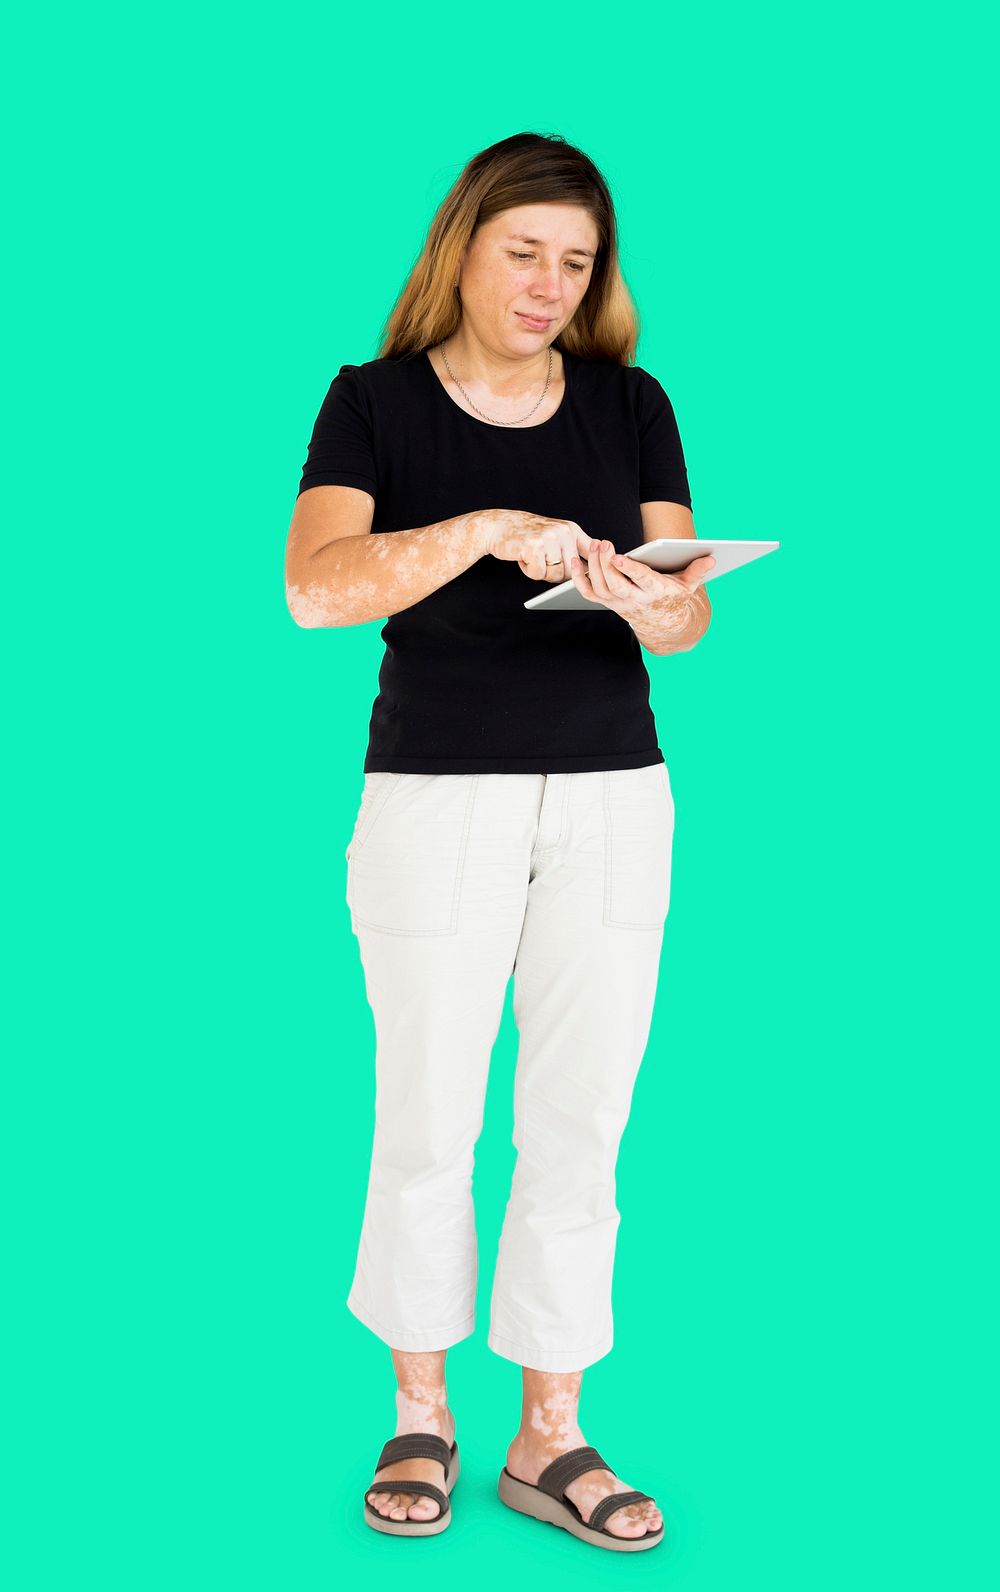 Caucasian woman full body standing and using digital tablet